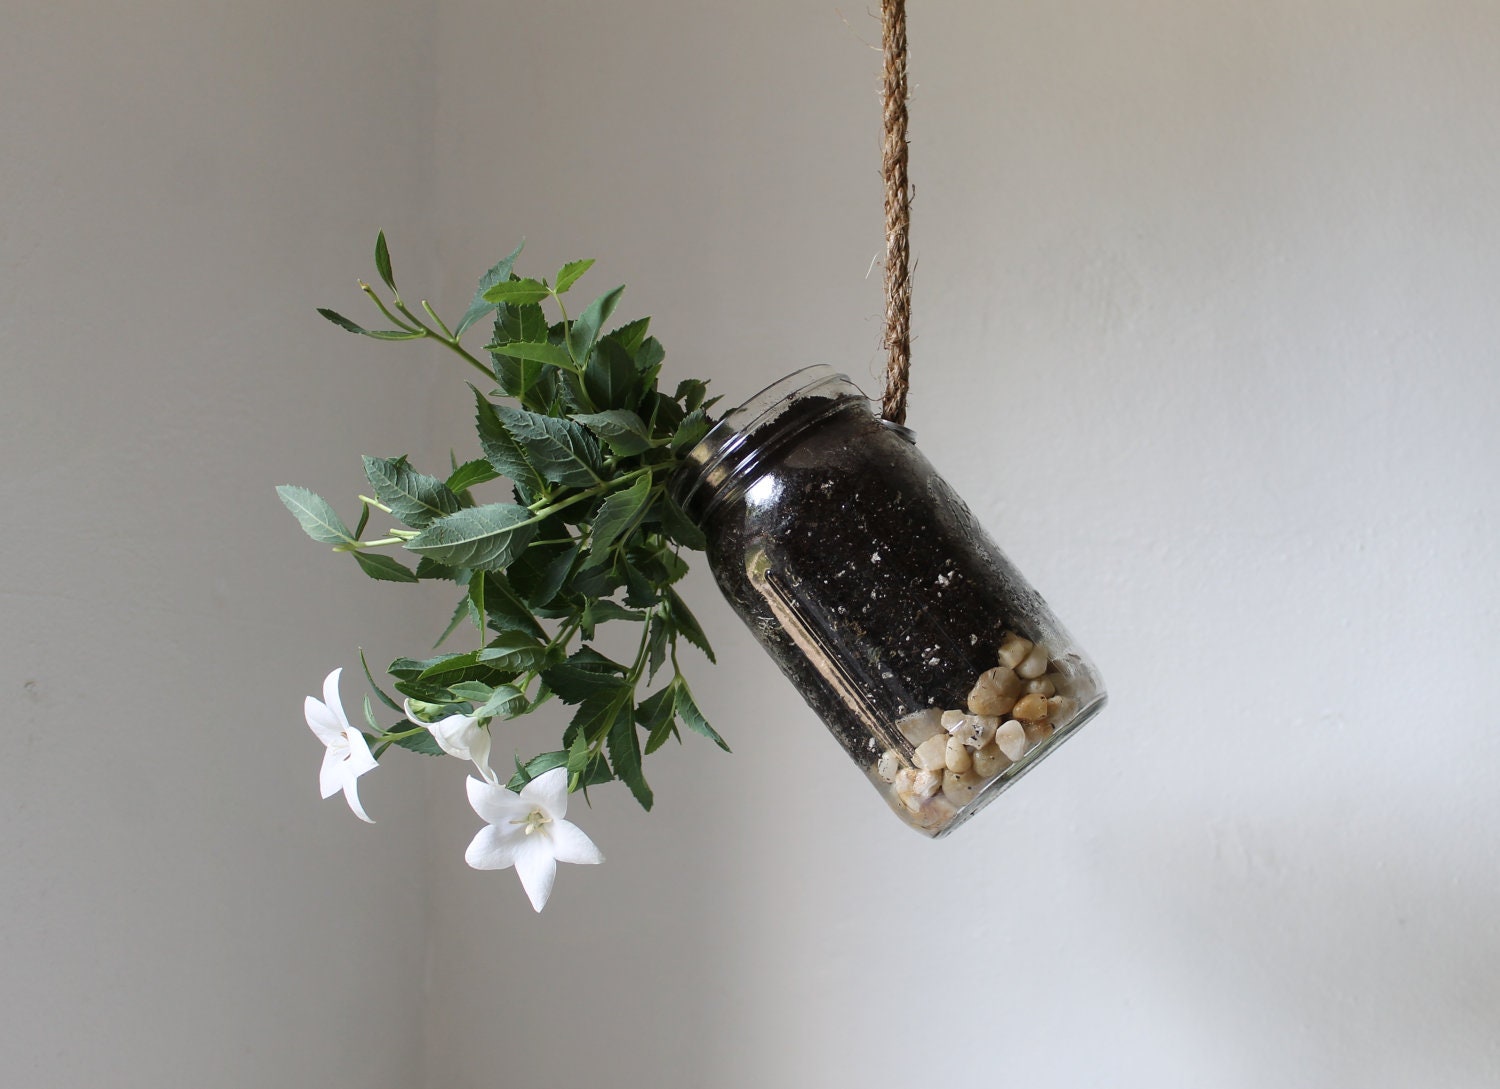 Hanging Mason Jar Planter with drainage - Upcycled home & garden decor - Quart Sized Ball Jar herb and flower planter - BootsNGus design - BootsNGus